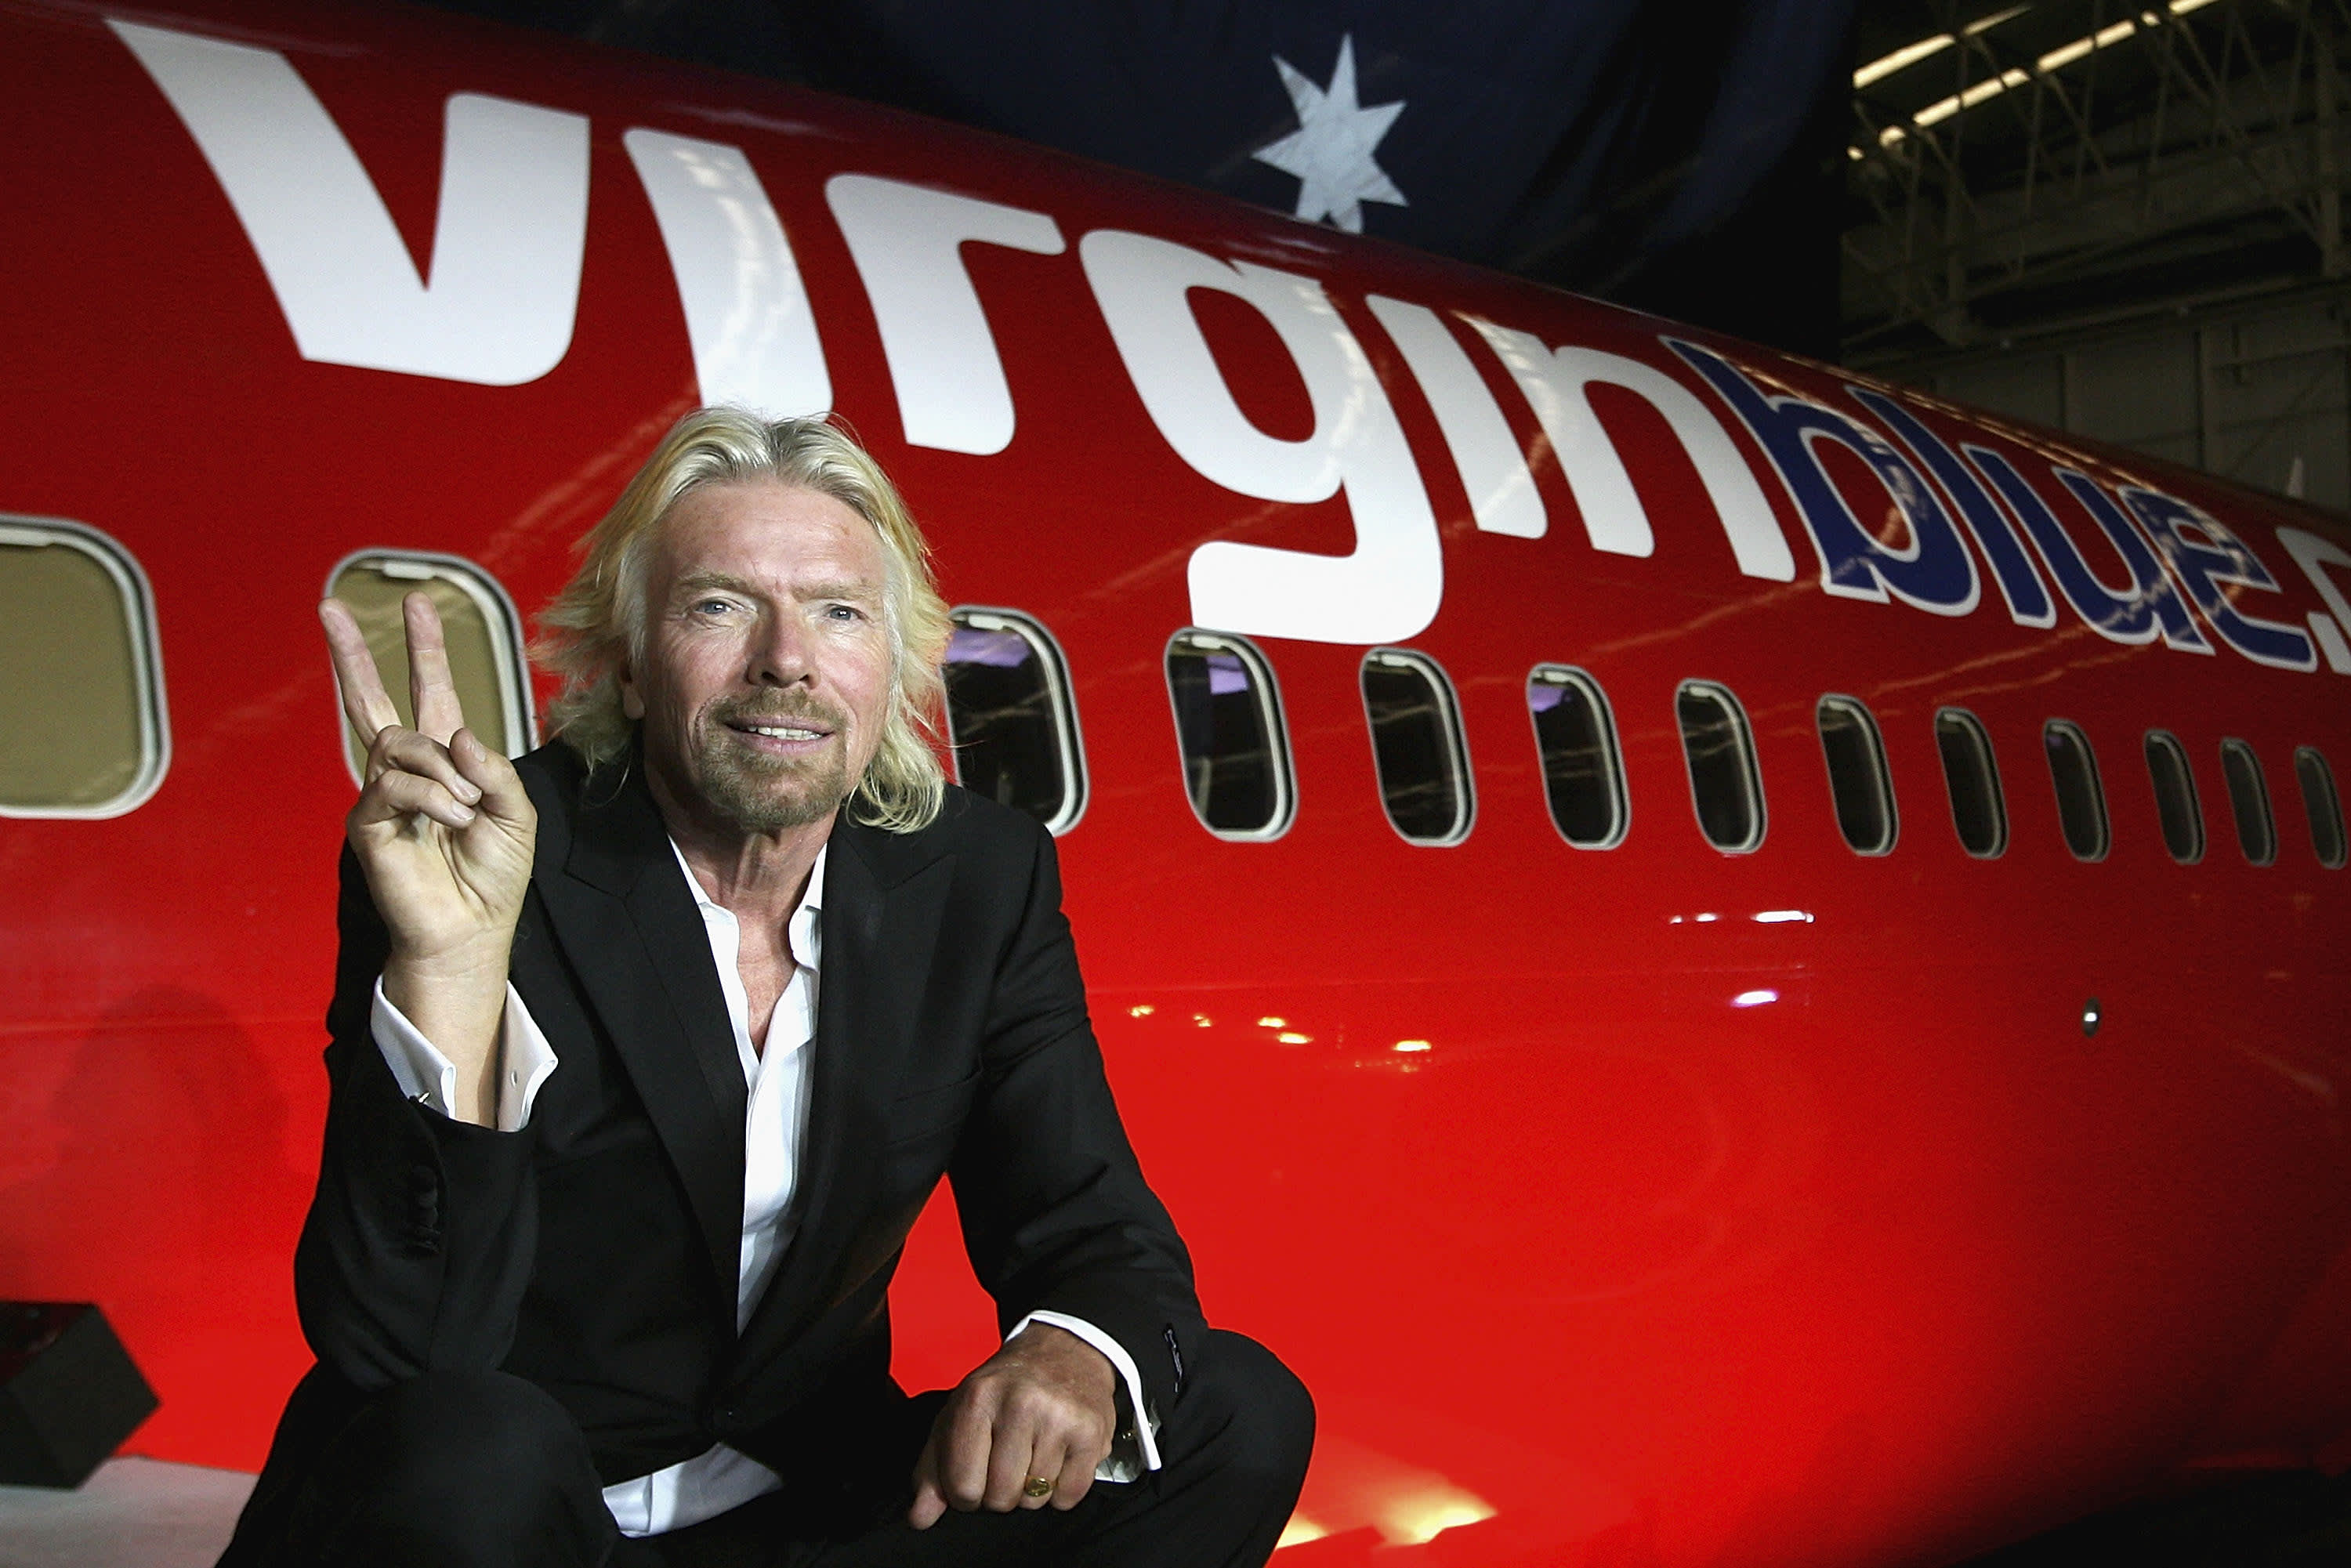 Richard Branson reveals who will take over his company when he leaves